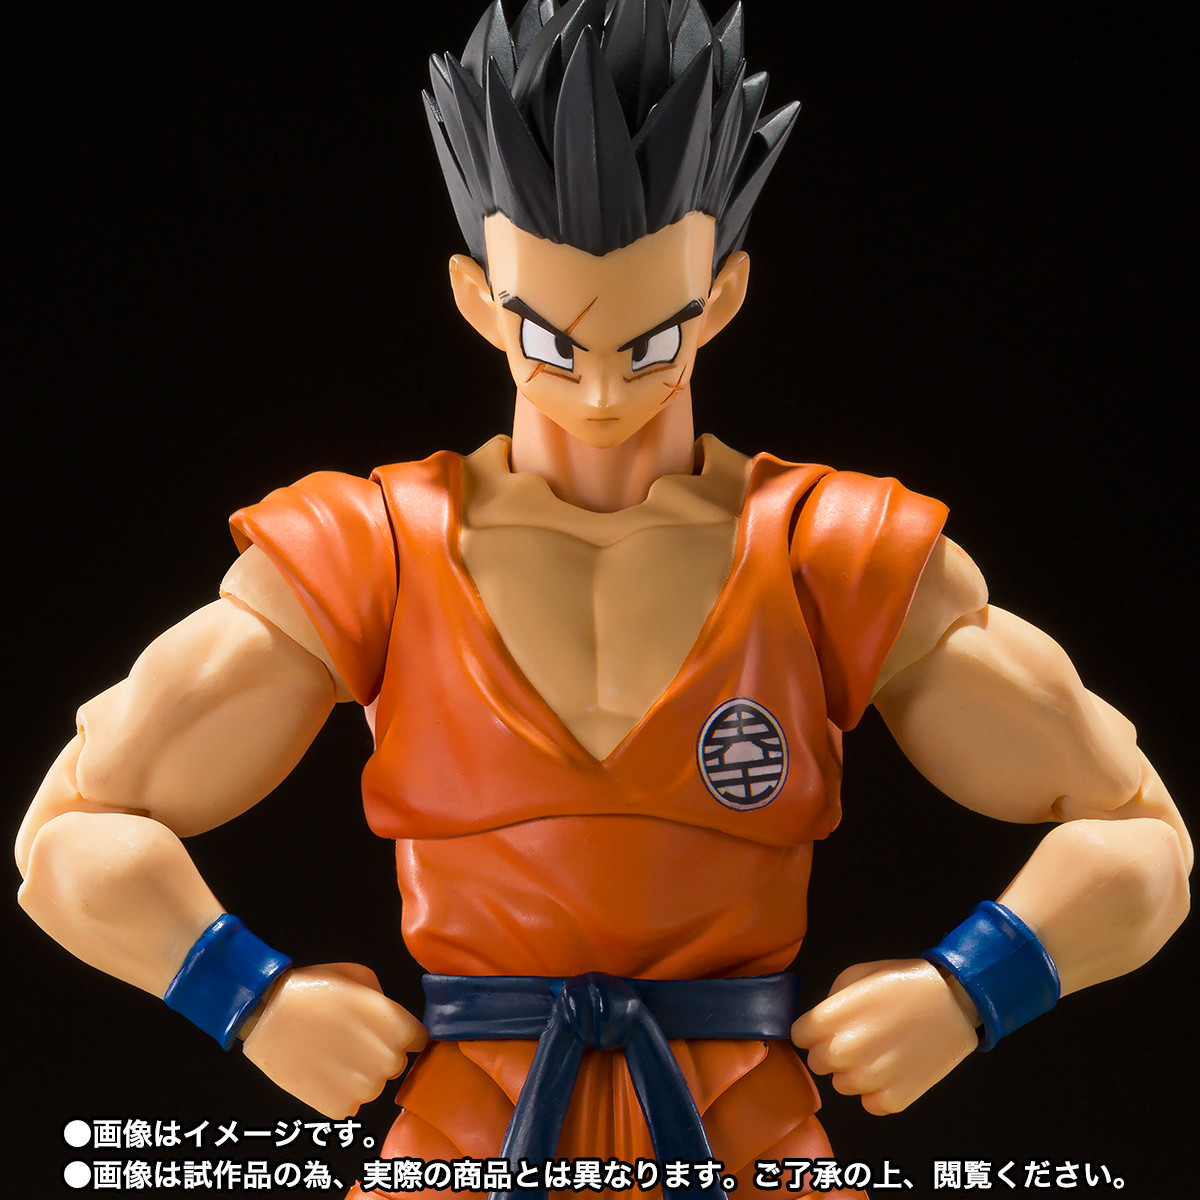 YAMCHA EARTH'S FOREMOST FIGHTER FIG. 15 CM DRAGON BALL Z SH FIGUARTS